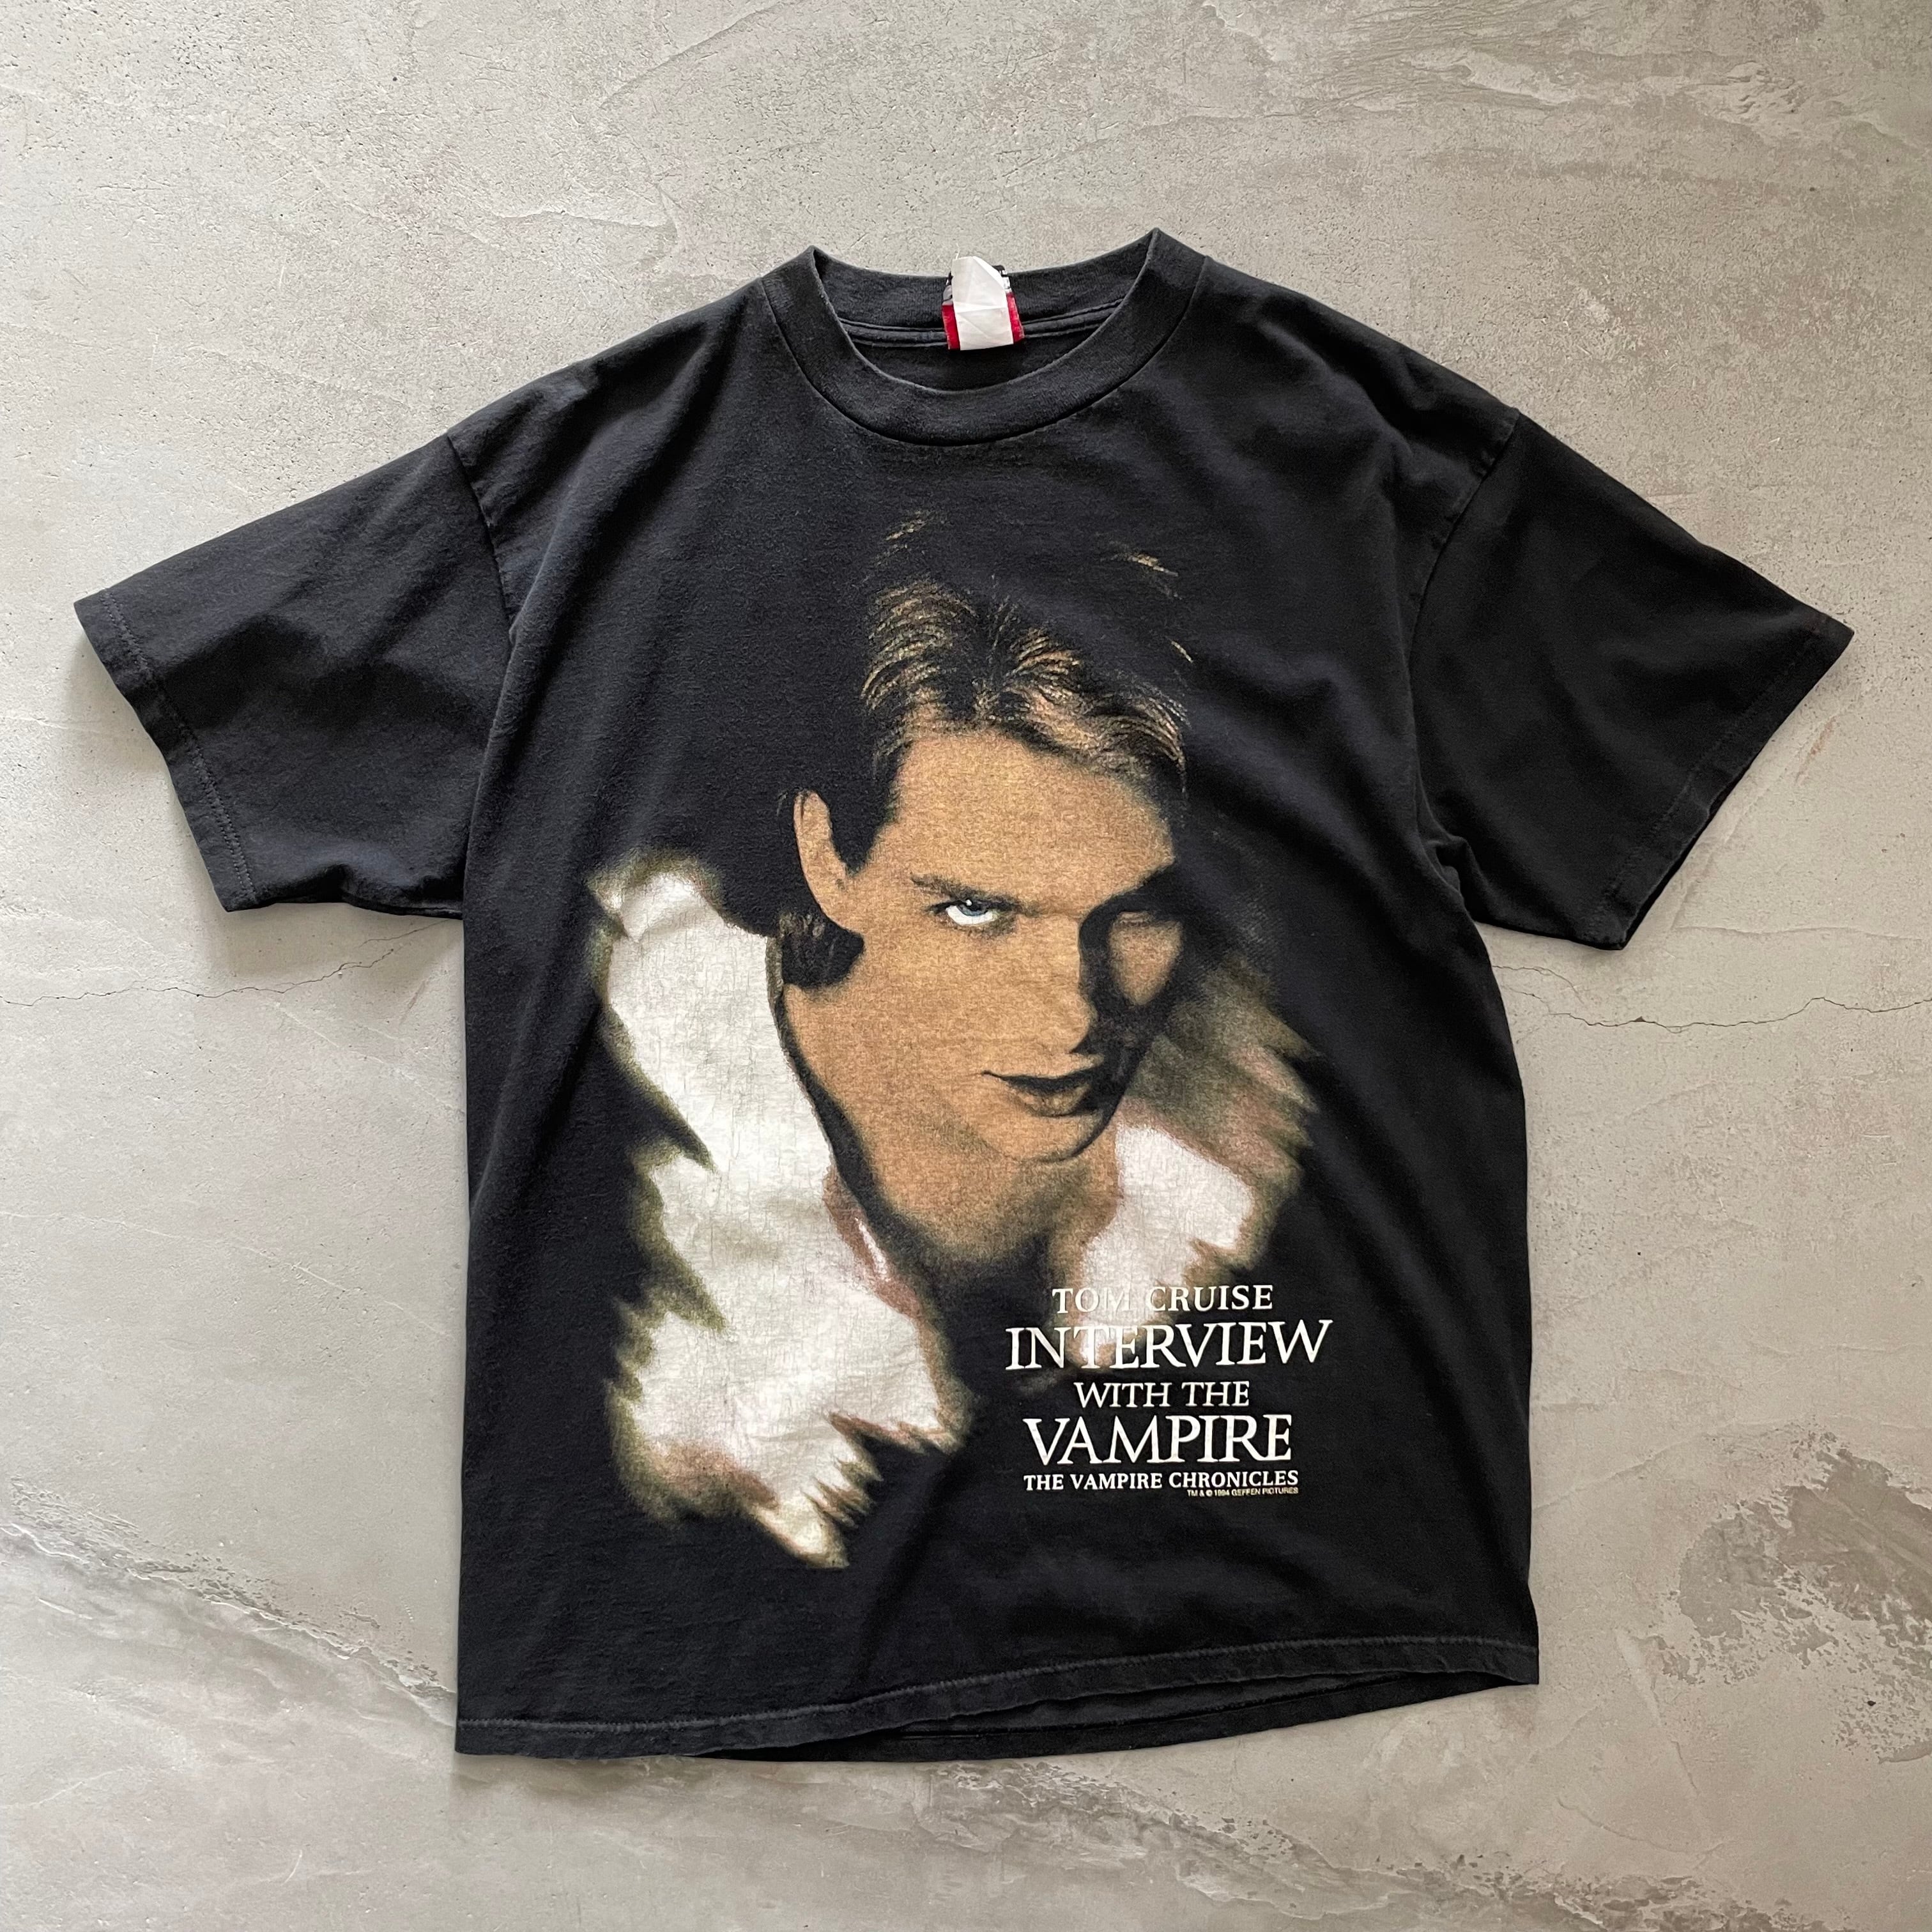 Interview with the Vampire 90s Tシャツ30000円でいかがでしょうか